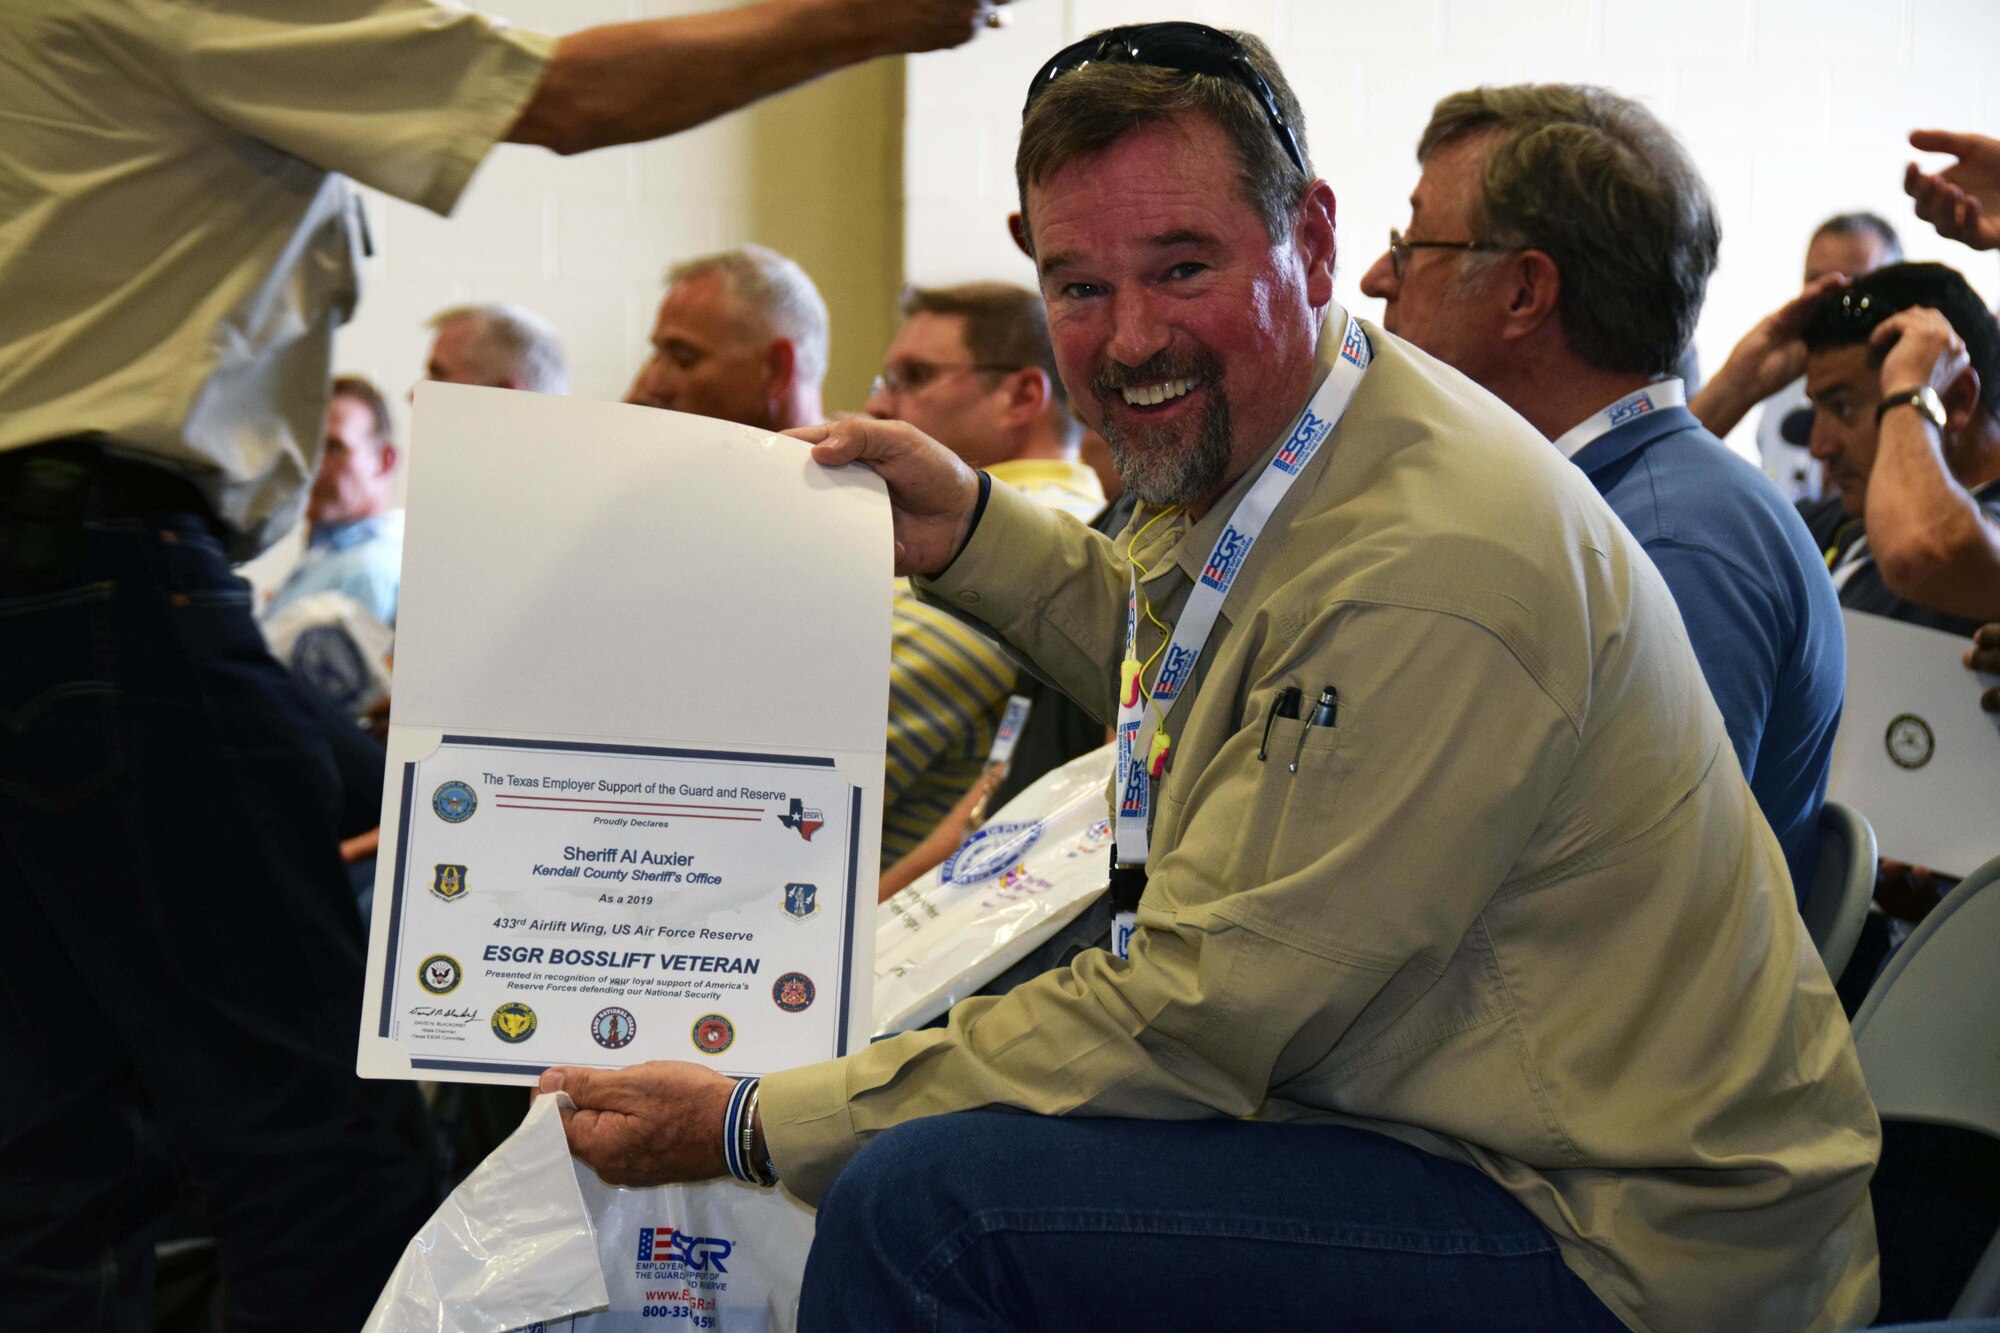 Kendall County Sheriff Al Auxier shows-off a certificate presented to him after completing the Employer Support of Guard and Reserve Bosslift event at Joint Base San Antonio-Lackland, Texas Aug. 3, 2019.